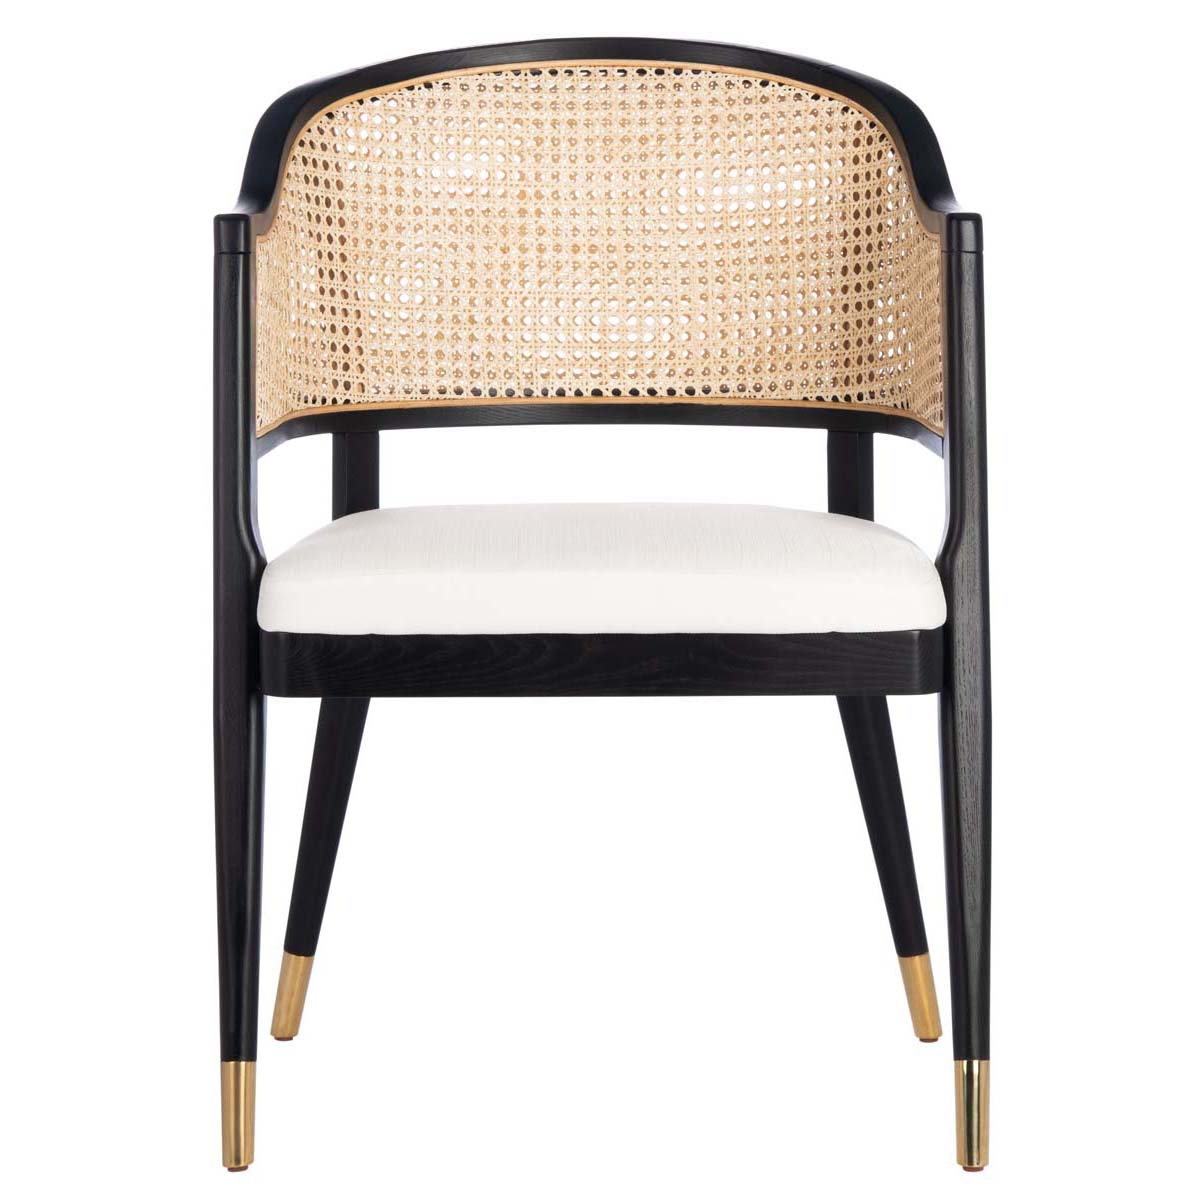 Safavieh Couture Rogue Rattan Dining Chair